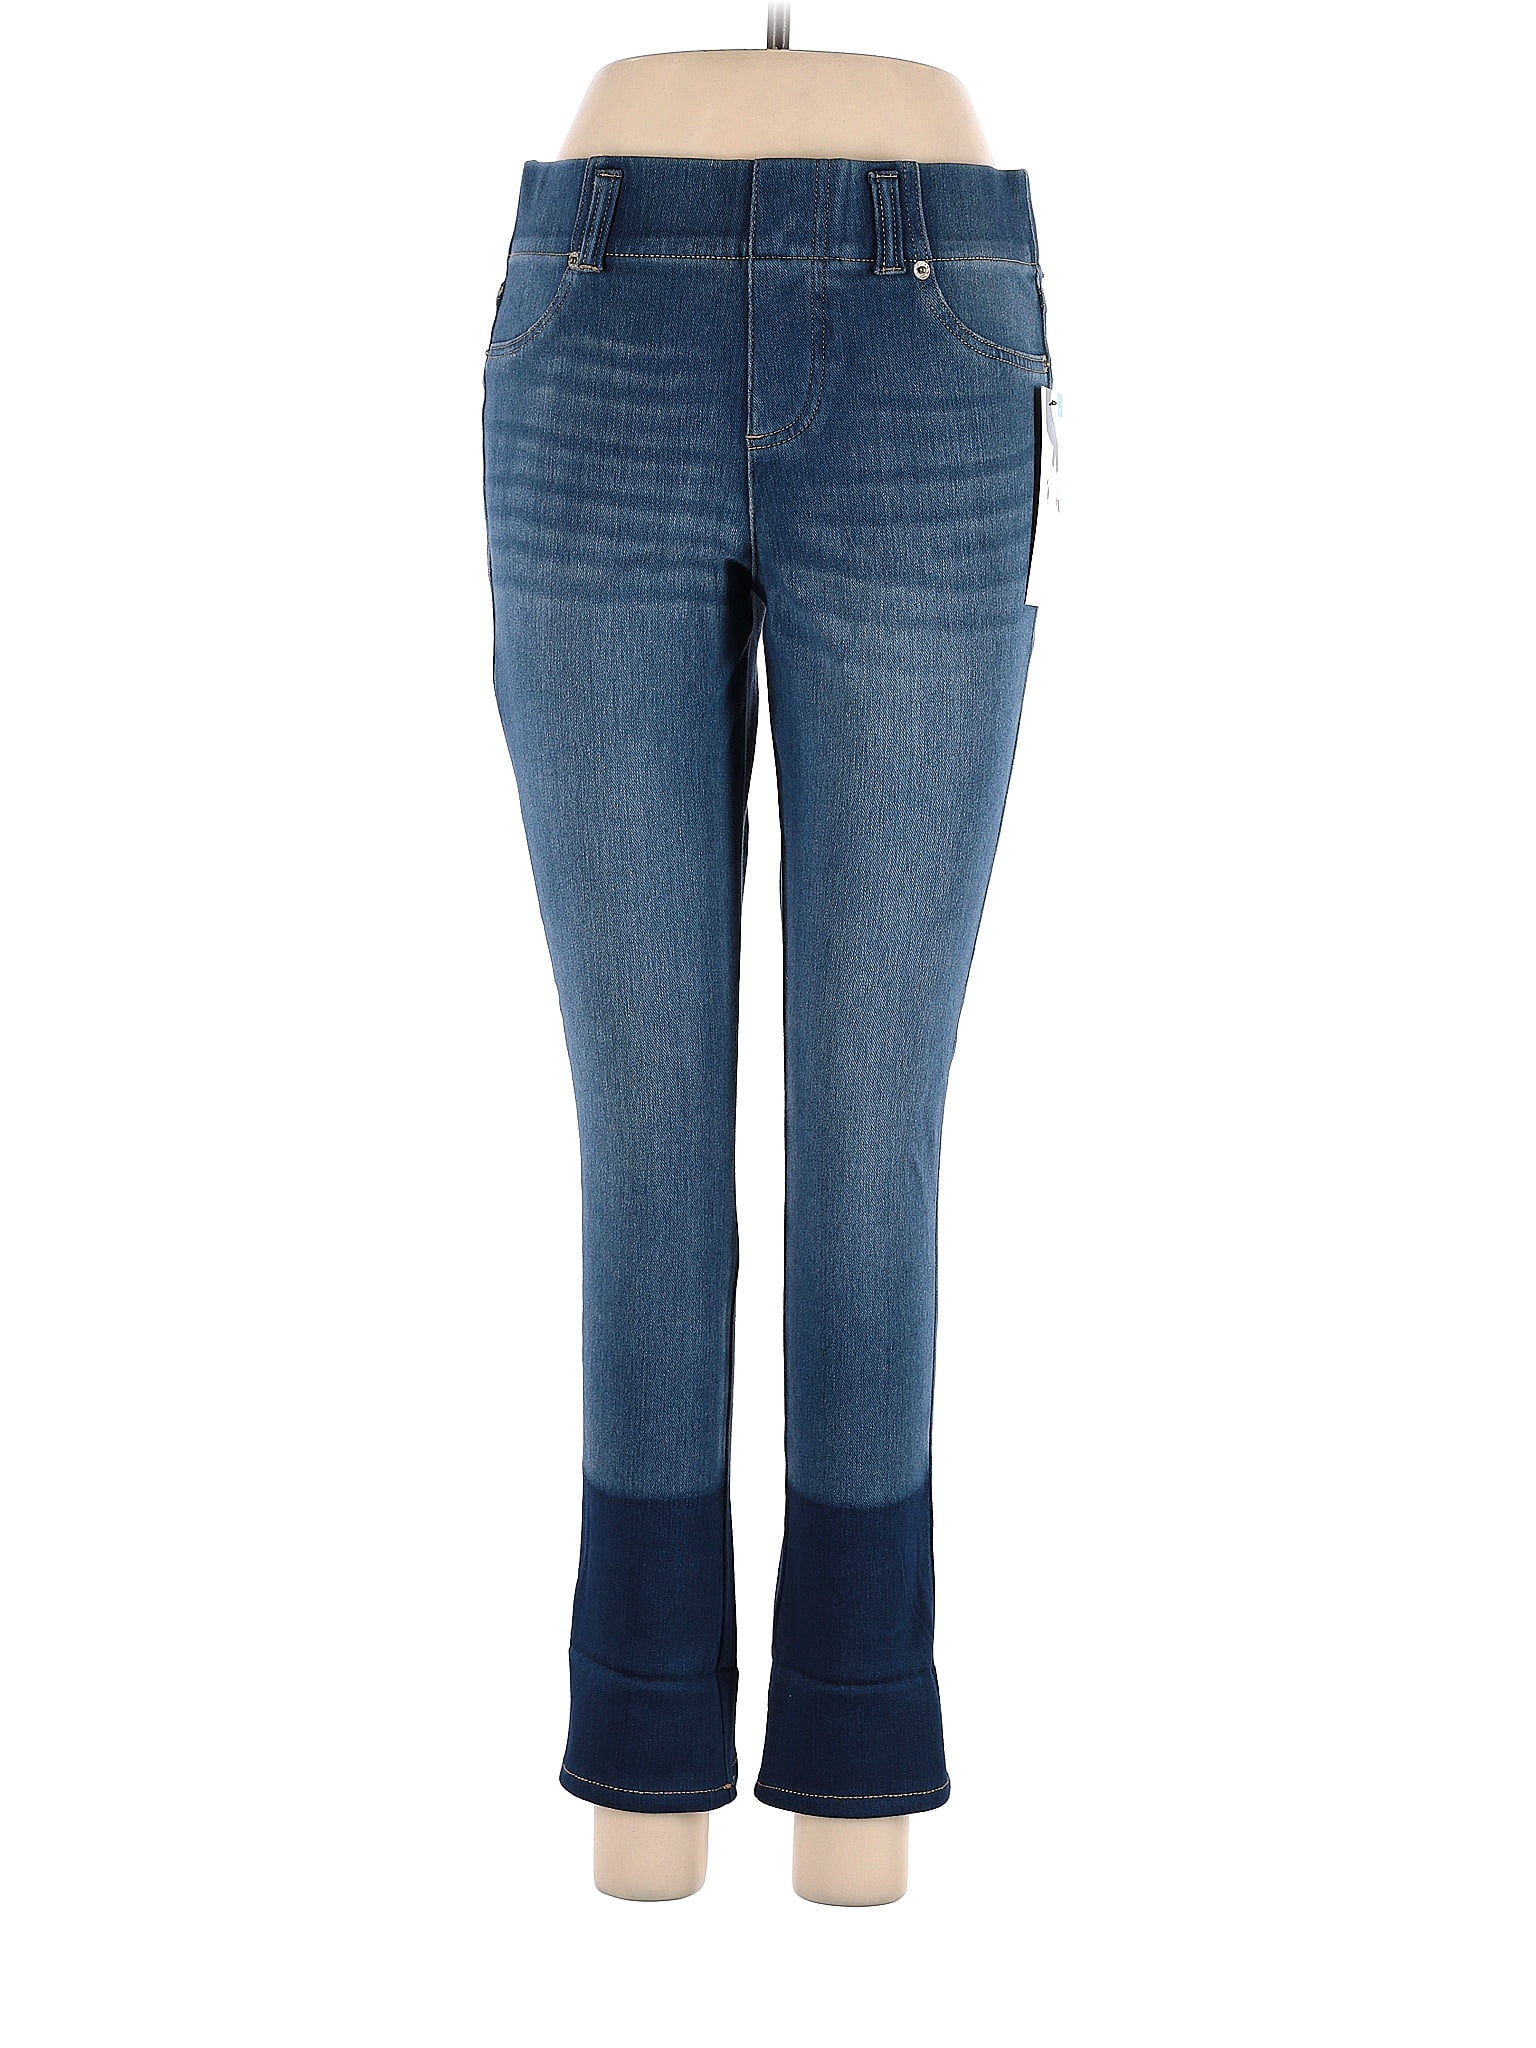 Mixit Solid Blue Jeans Size 12 - 50% off